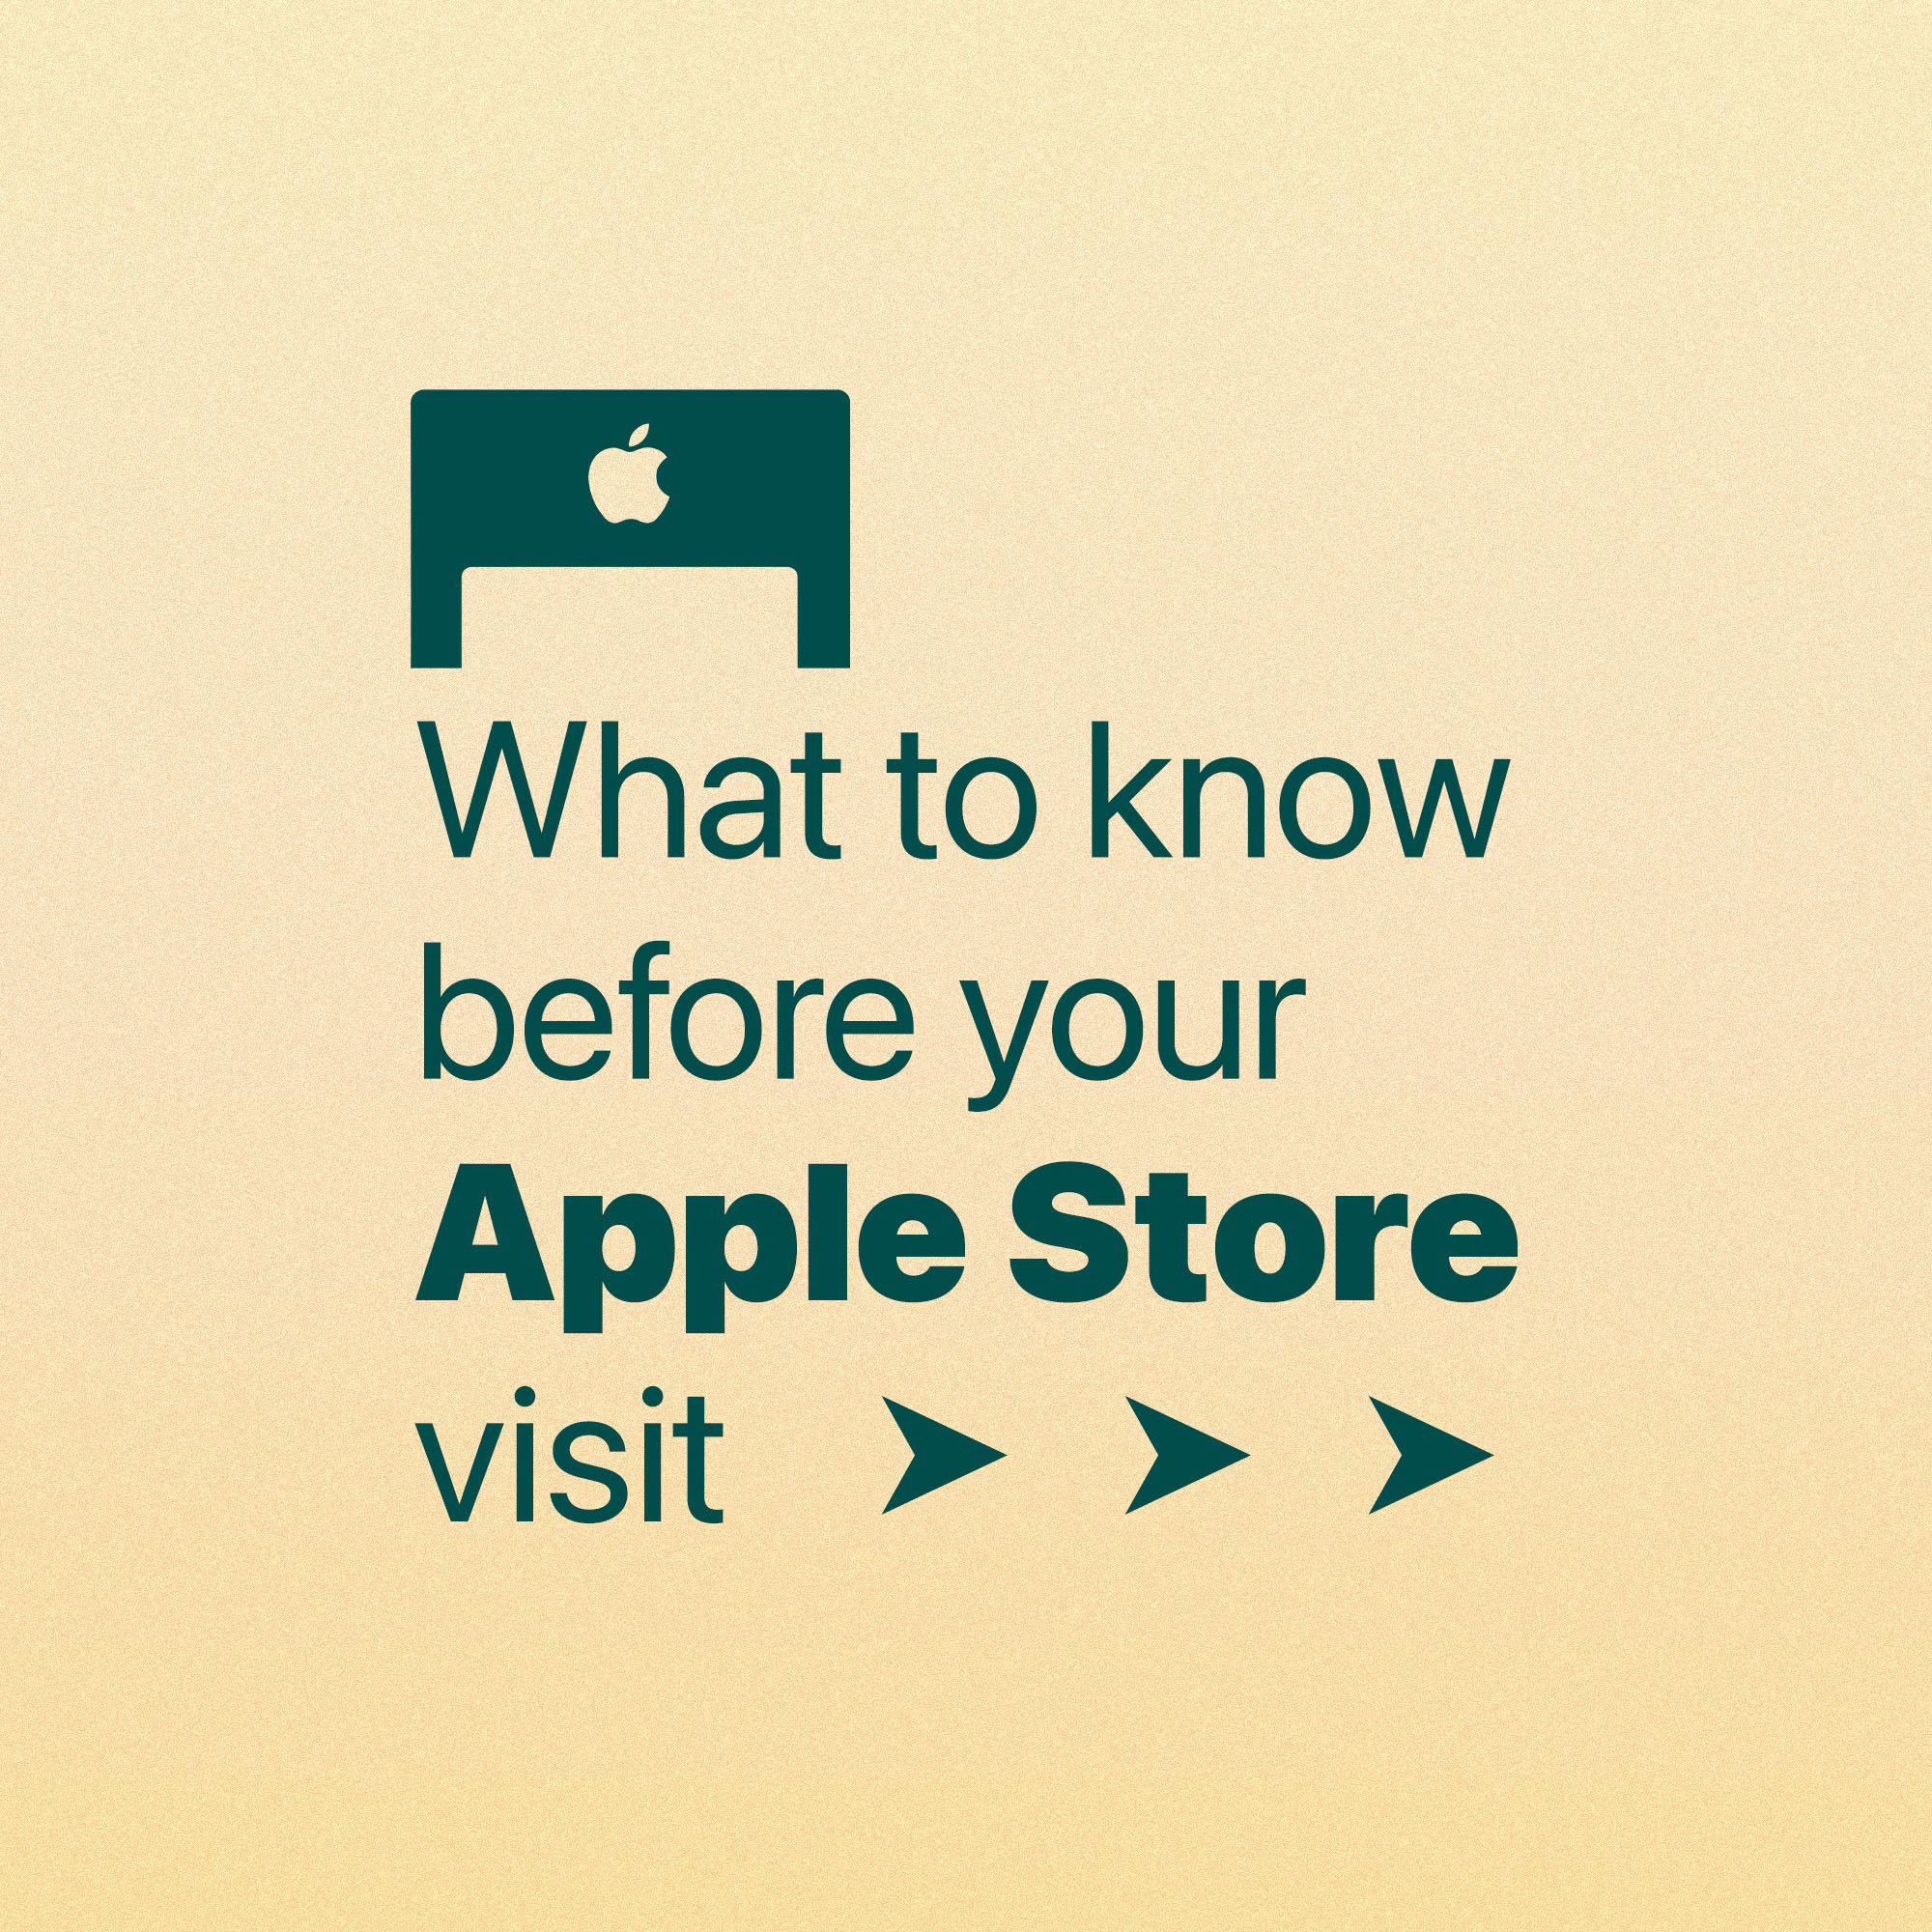 What to know before your Apple Store visit.